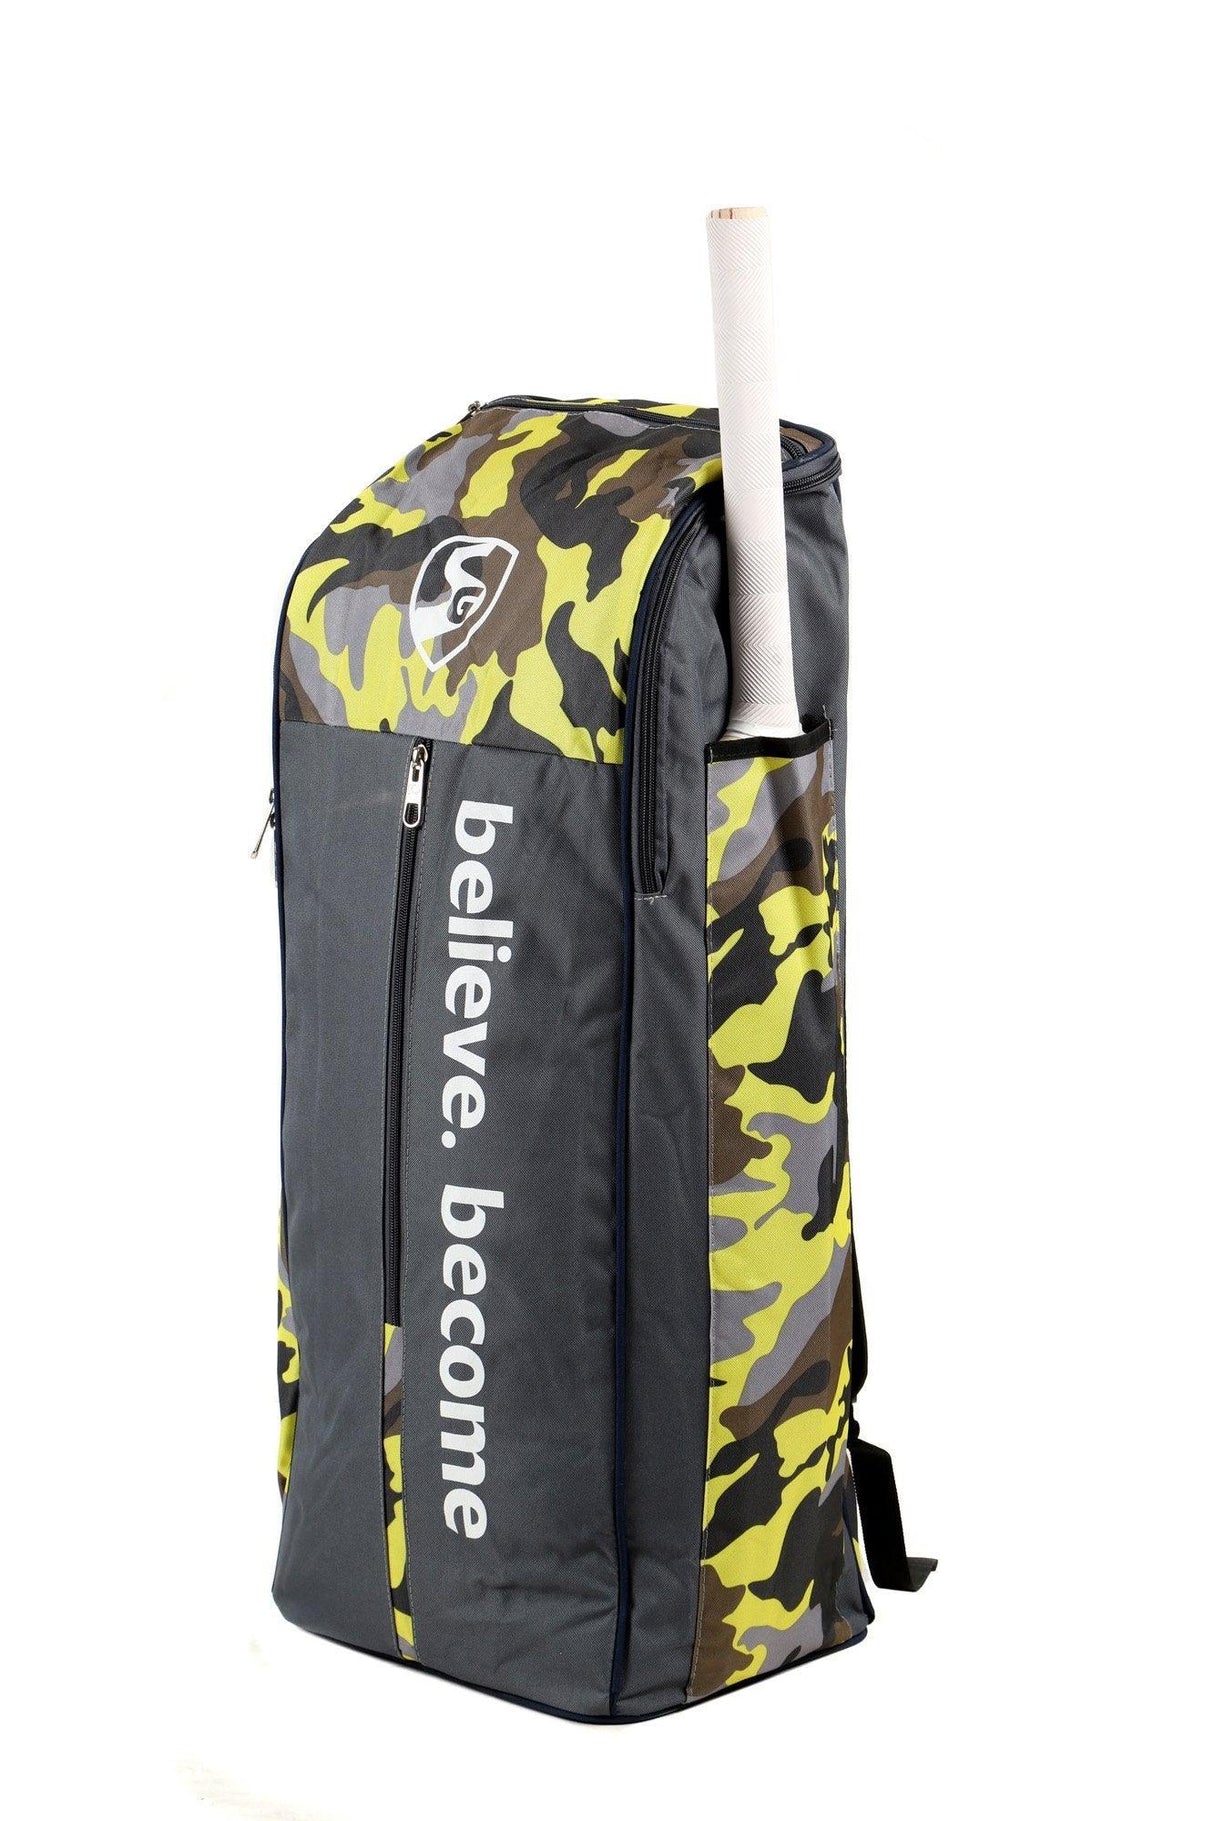 SG Savage ® X2 Kit Bag with Shoe Compartment Multi Color Without Wheel Mill Sports 